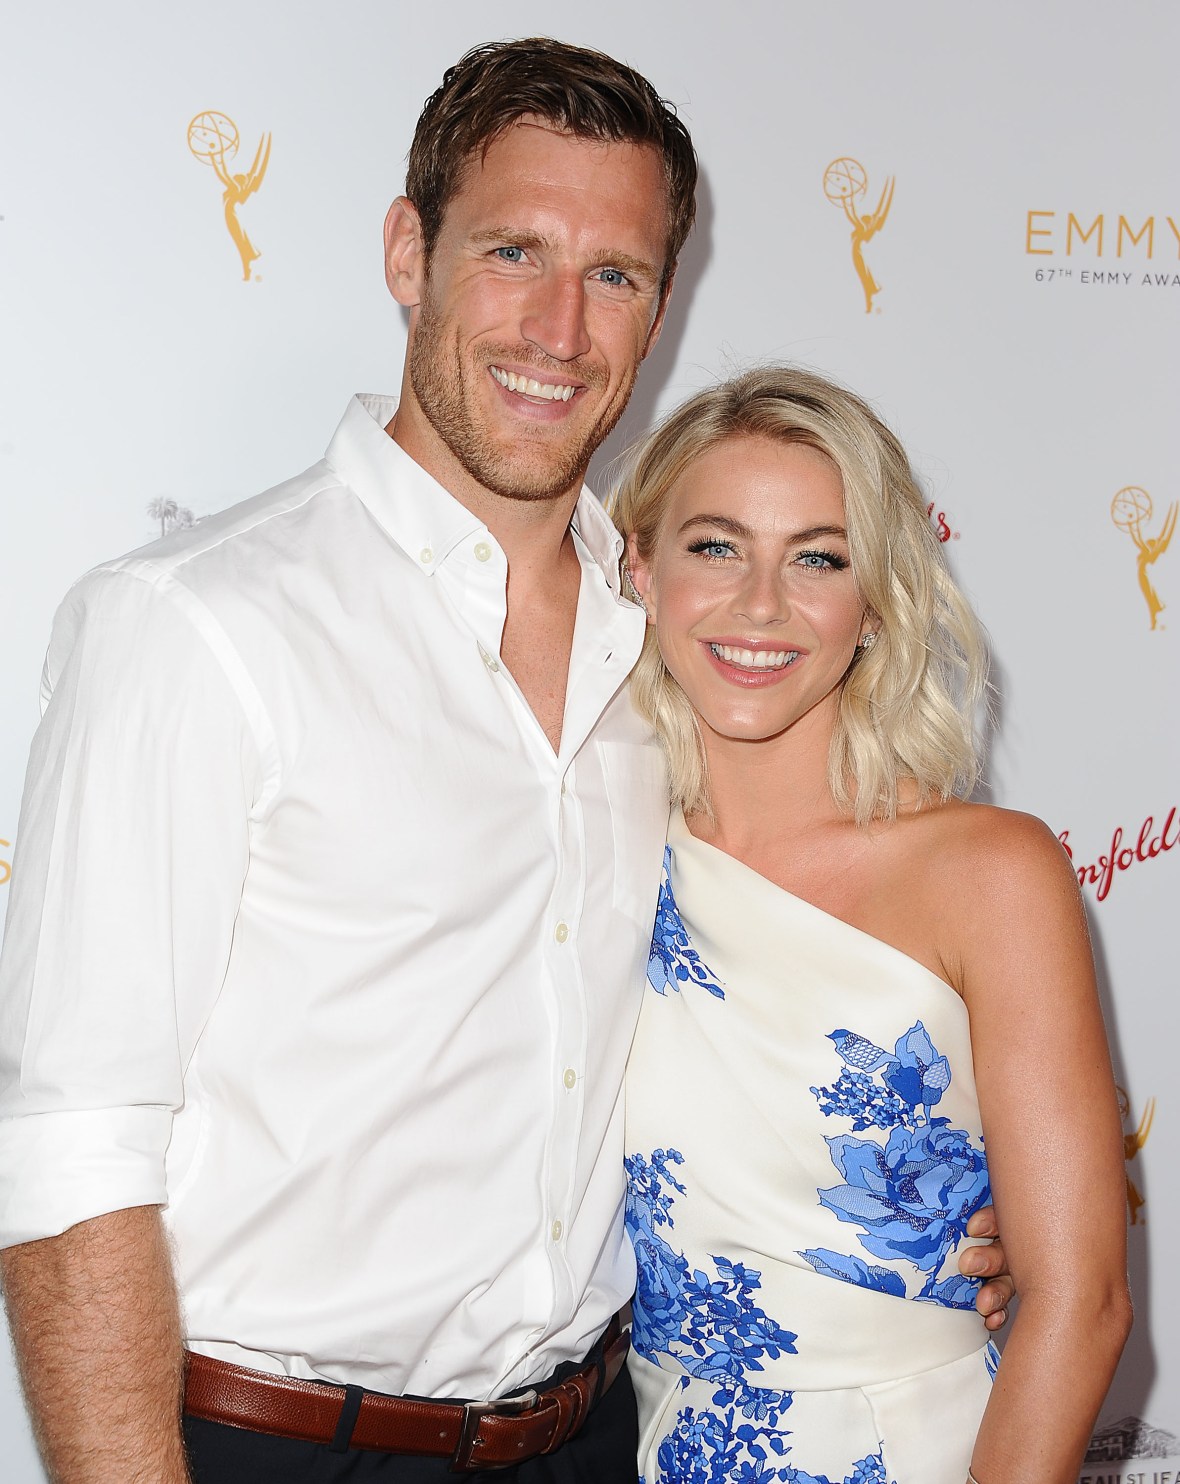 Julianne Hough Dishes on Her Upcoming Wedding to Fiancé Brooks Laich - Closer Weekly1180 x 1484